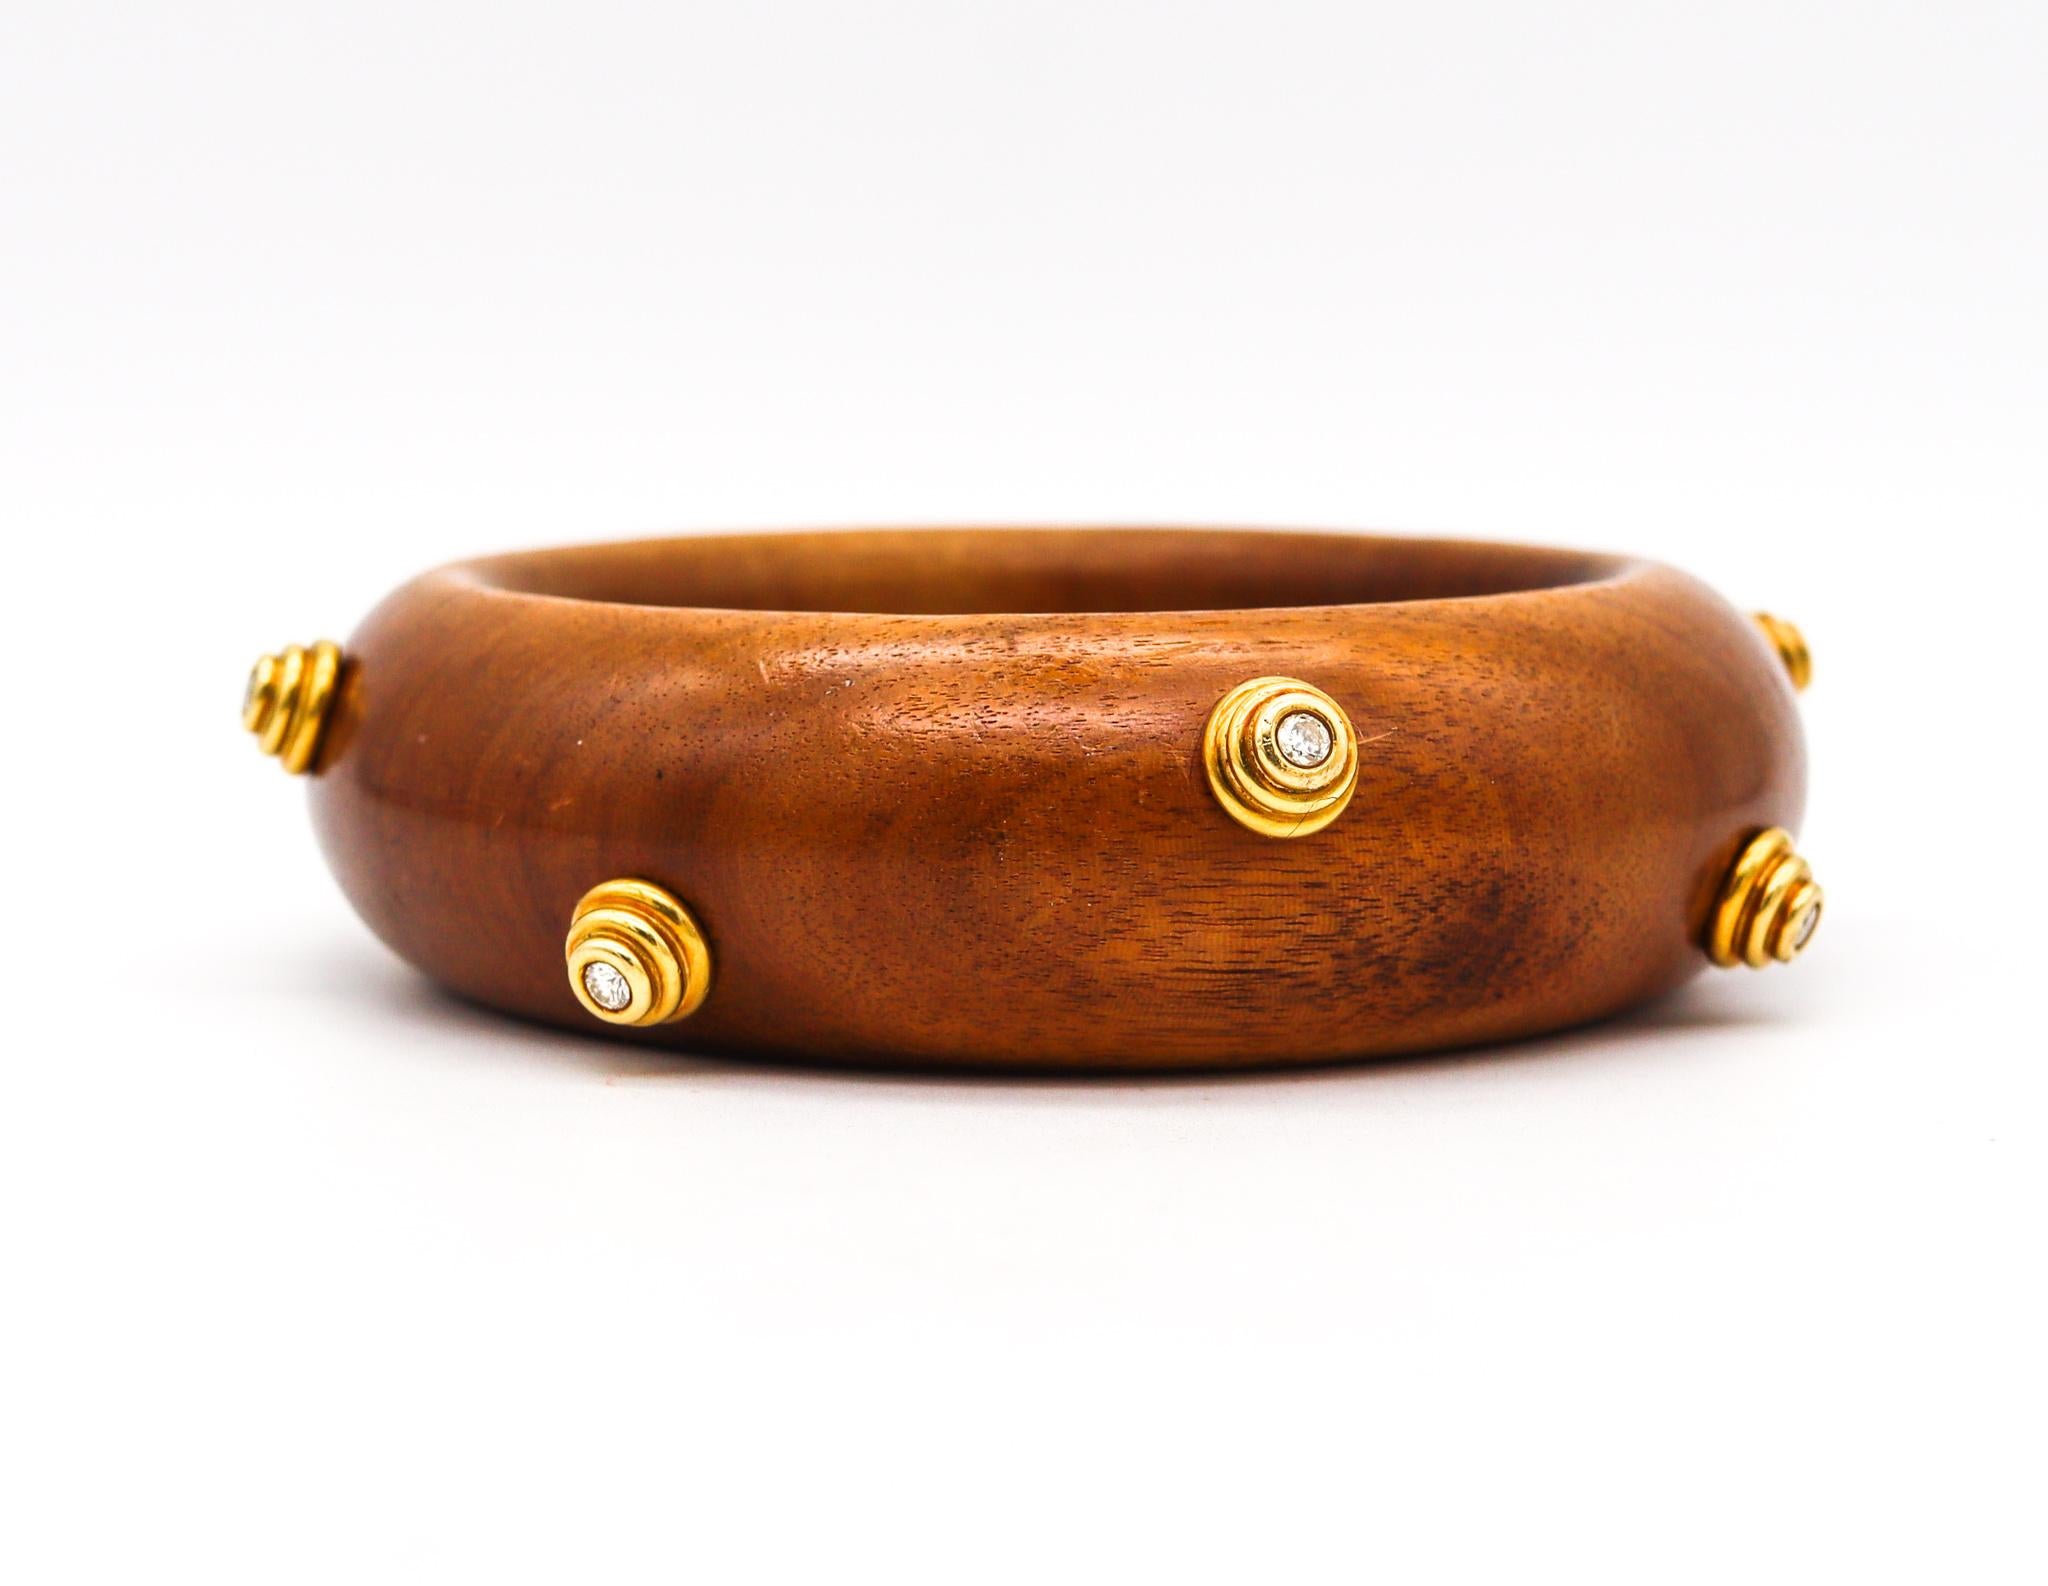 Wood bangle designed by Christian Dior and Georg Jensen & Wendell.

Beautiful vintage runaway bold piece, created by the fashion house of Christian Dior, back in the early 1960. Created with carved rose wood and accented with geometric elements